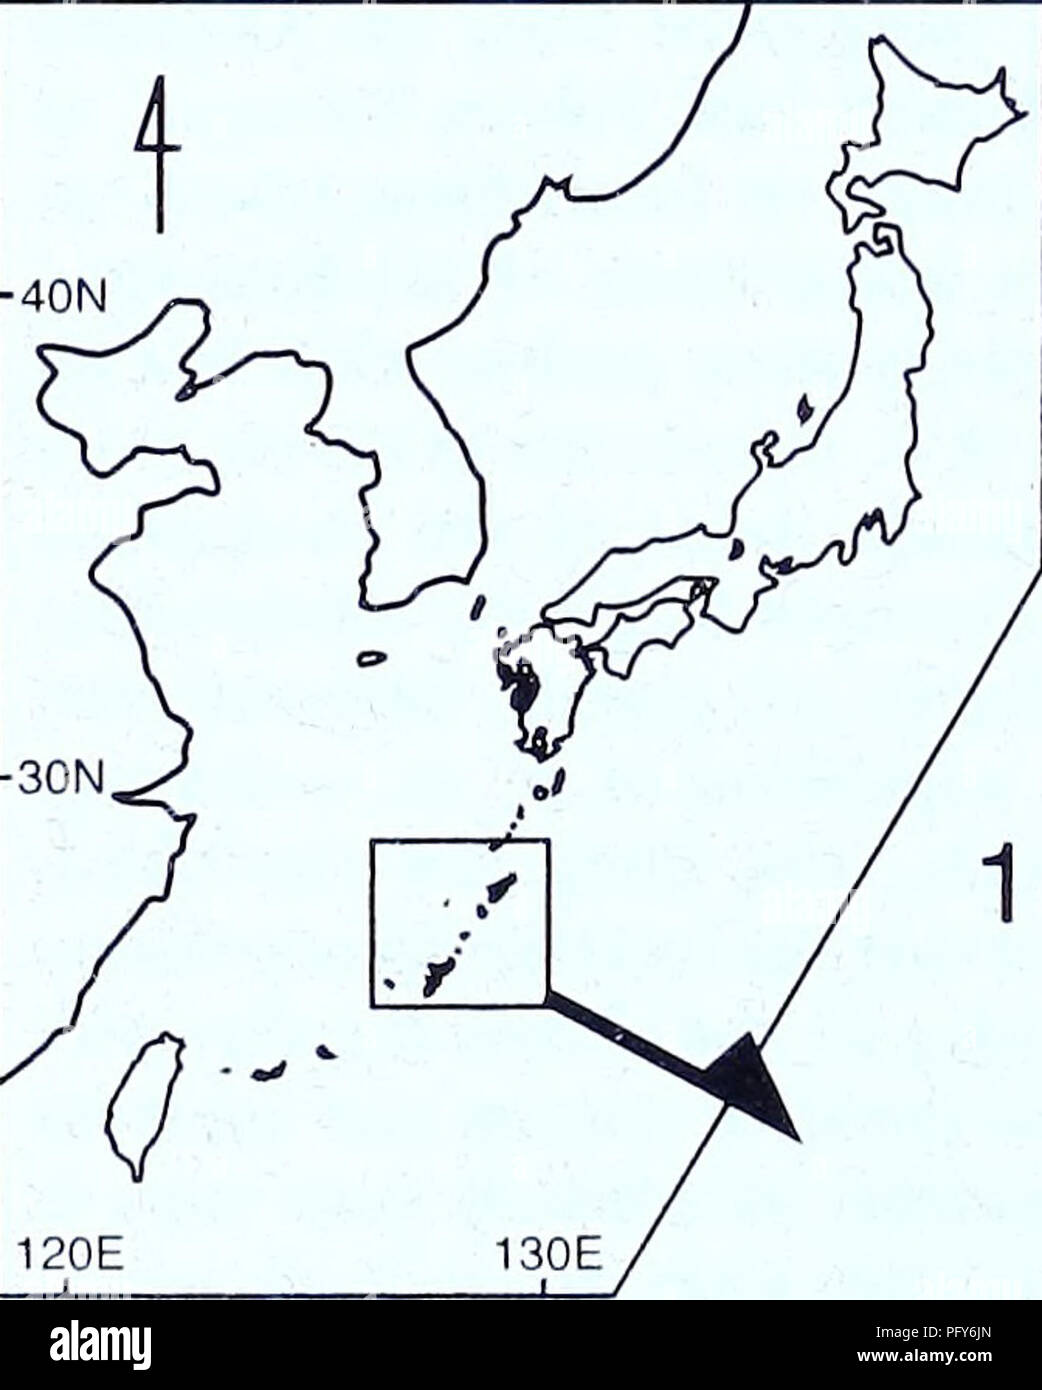 . Current Herpetology. 70 Current Herpetol. 20(2) 2001 Takarajima, Kodakarajima and Kojima Islands of the Tokara Group (Toyama, 1989; Ota et al., 1994). Two subspecies, E. m. marginatus from the Okinawa Group, and E. m. oshimensis from the Amami and Tokara Groups, are generally recog- nized on the basis of scutellation and coloration (e.g., Nakamura and Ueno, 1963). Although some external characters, such as the scale row number and juvenile tail coloration, are known to vary among island populations of E. marginatus, varia- tions are not consistent with the geographic arrangement of populatio Stock Photo